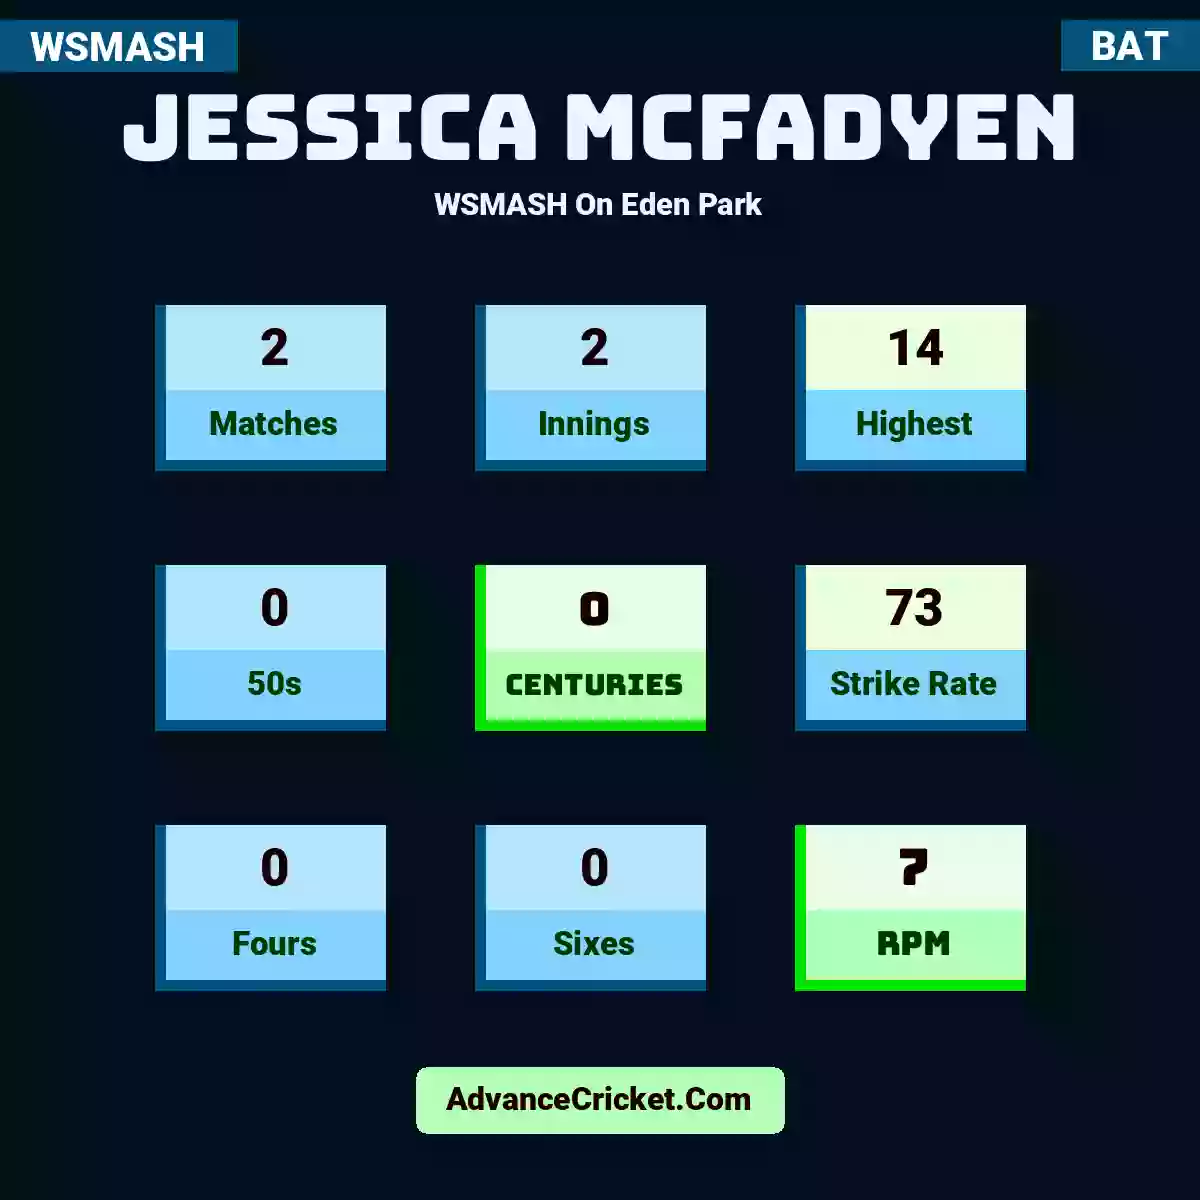 Jessica McFadyen WSMASH  On Eden Park, Jessica McFadyen played 2 matches, scored 14 runs as highest, 0 half-centuries, and 0 centuries, with a strike rate of 73. J.McFadyen hit 0 fours and 0 sixes, with an RPM of 7.